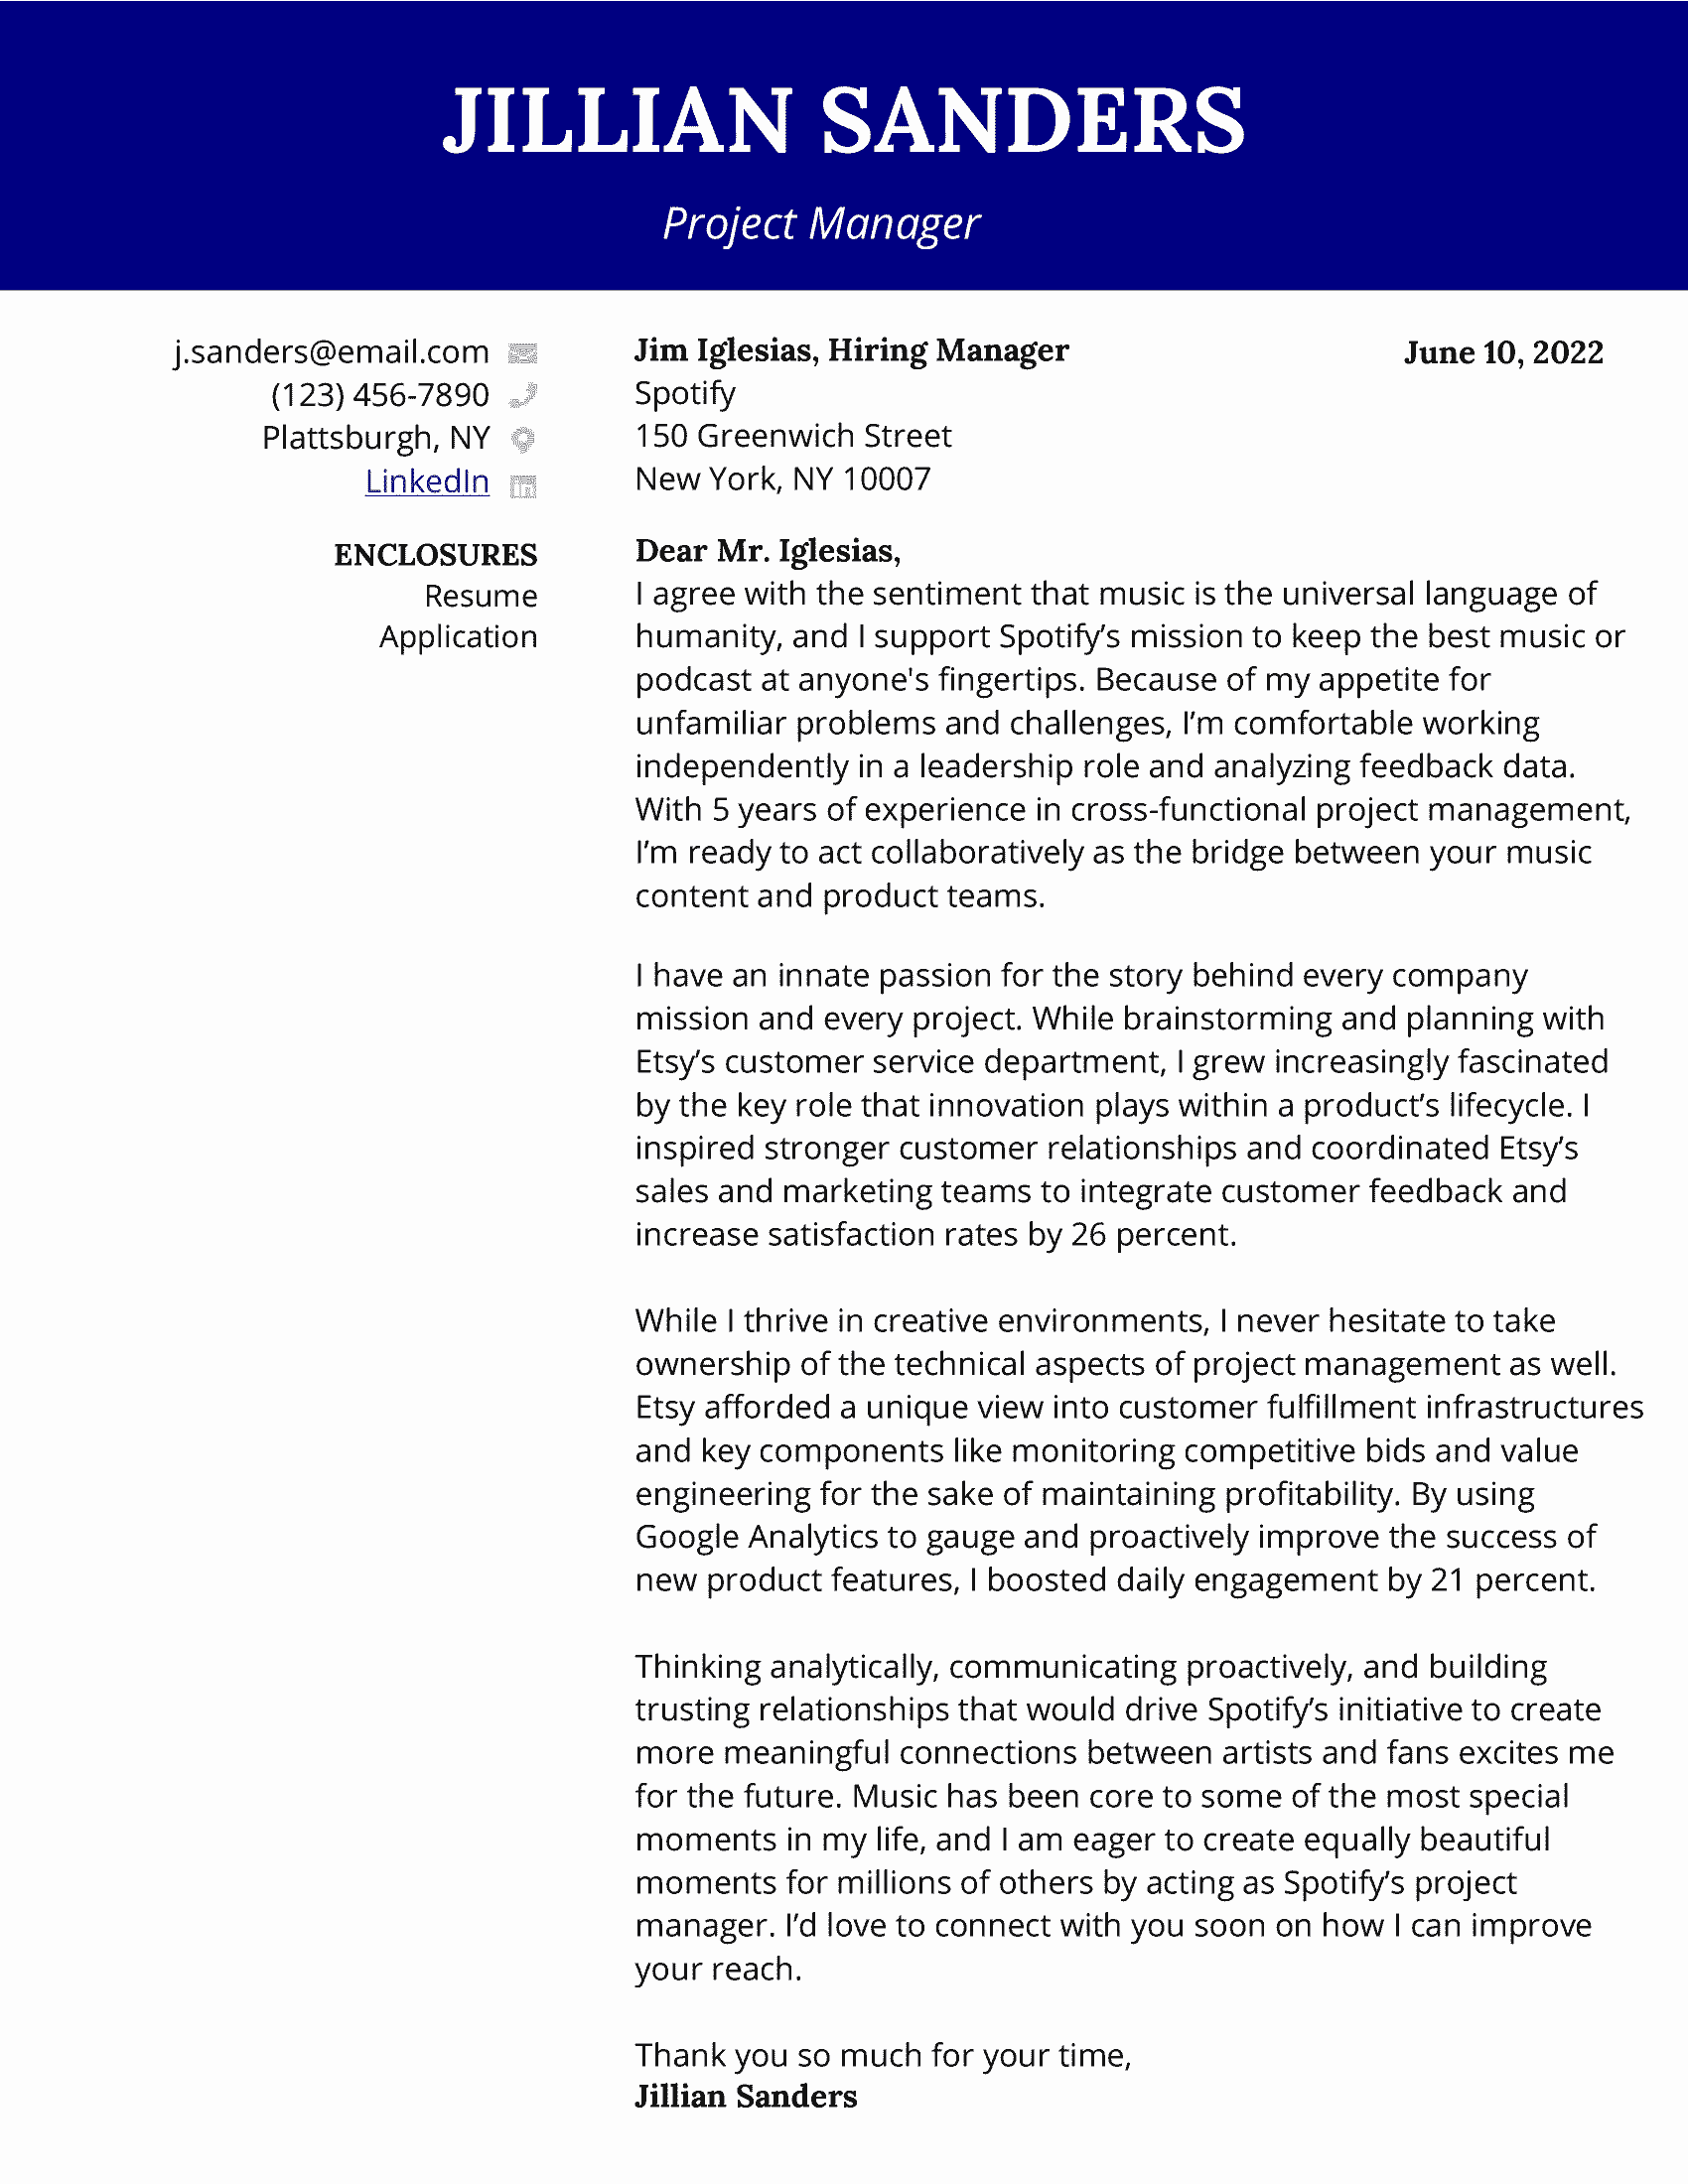 Project manager cover letter with blue contact header